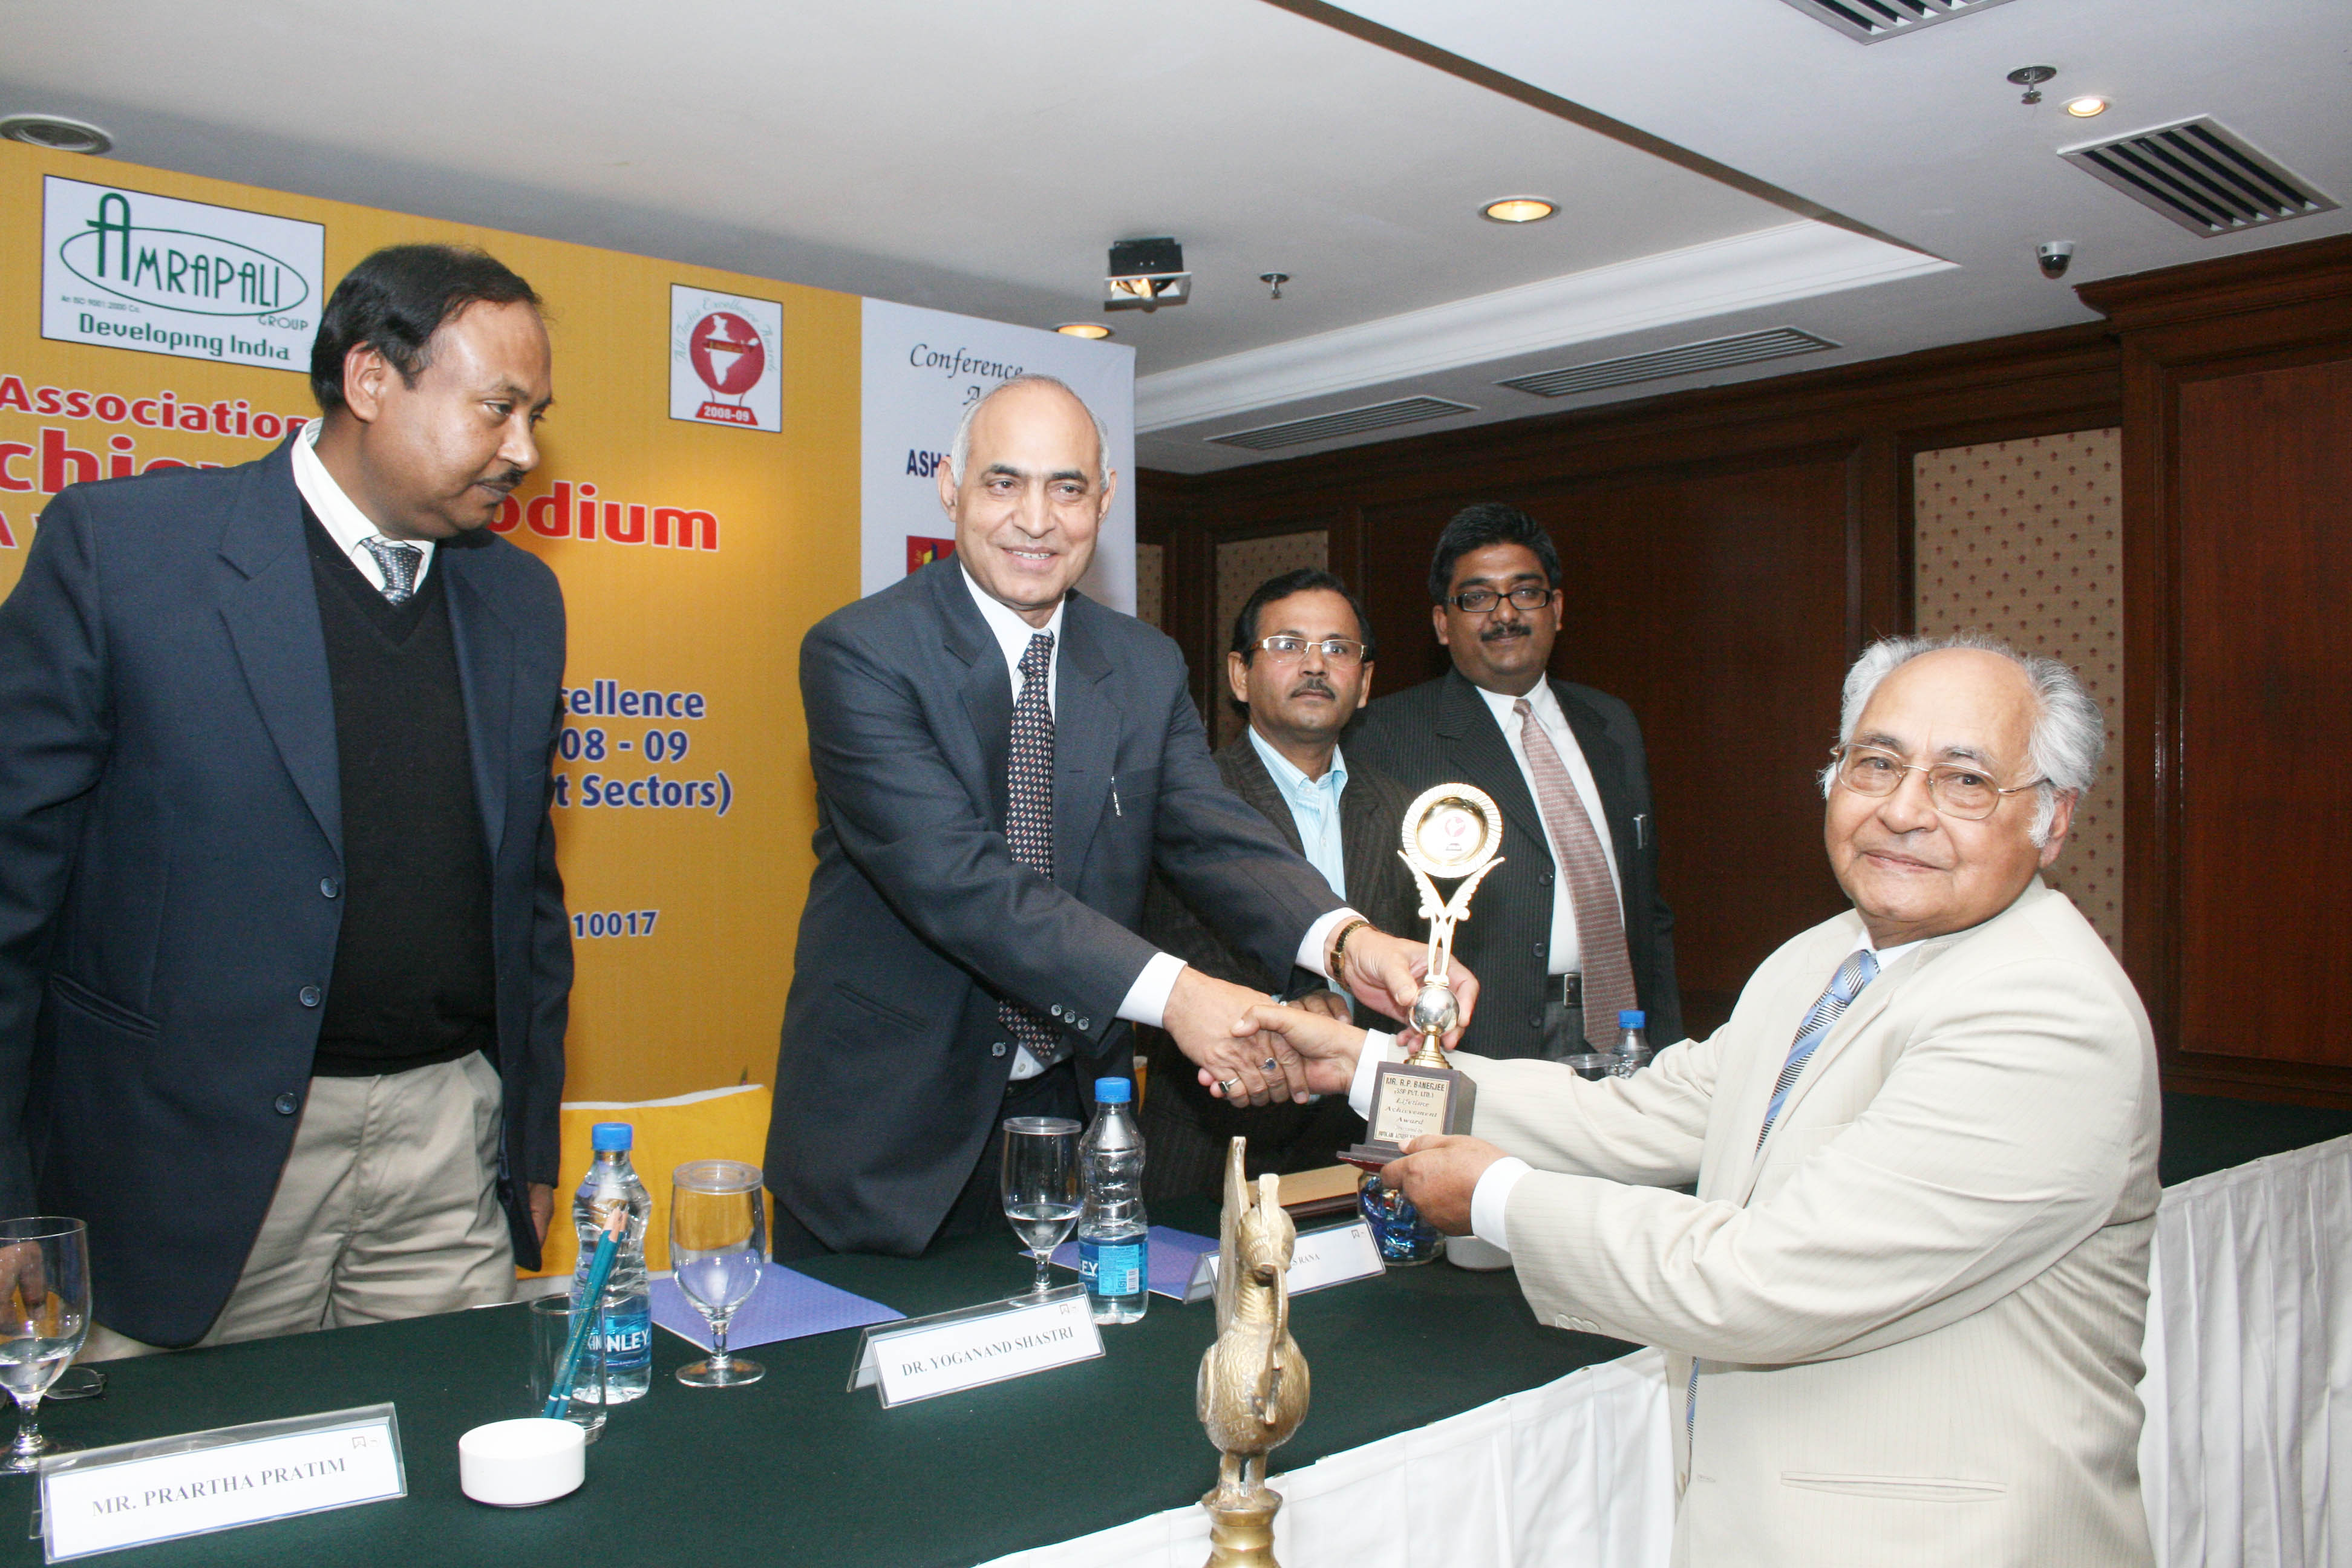 Our Chairman Shri R P Banerjee received the Lifetime Achievement Award for his contribution to the industry from All India Achievers Podium in New Delhi on 25-12-2009